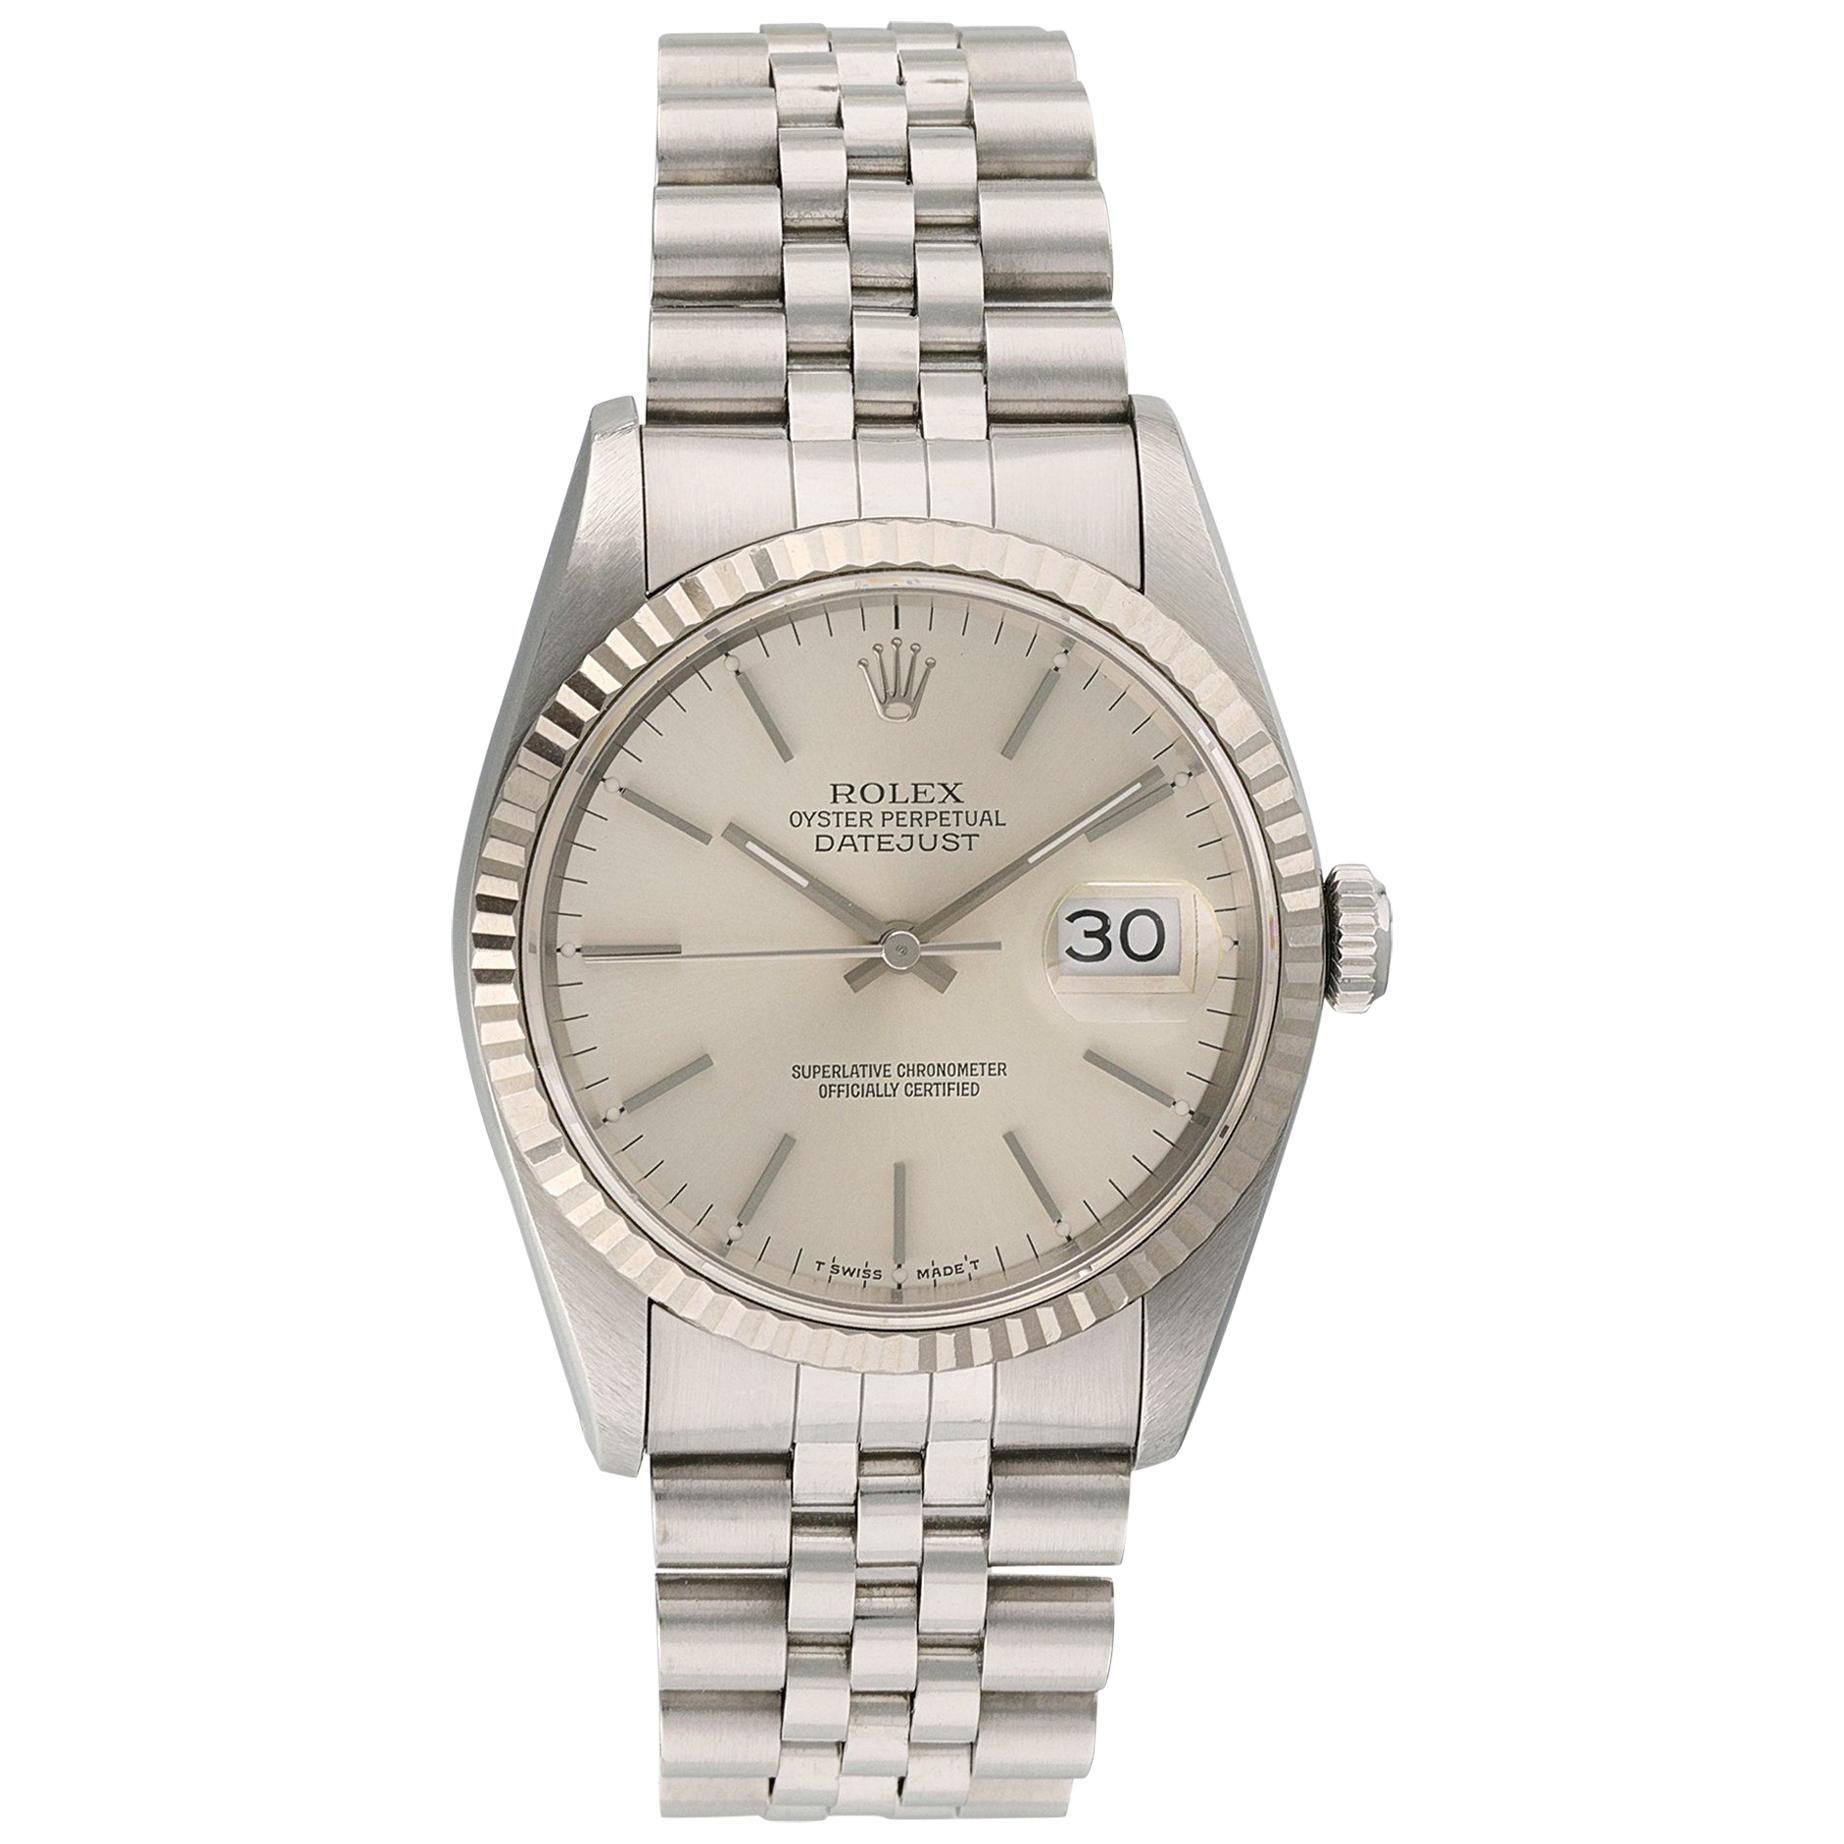 Rolex Oyster Perpetual Datejust 16234 Men's Watch For Sale